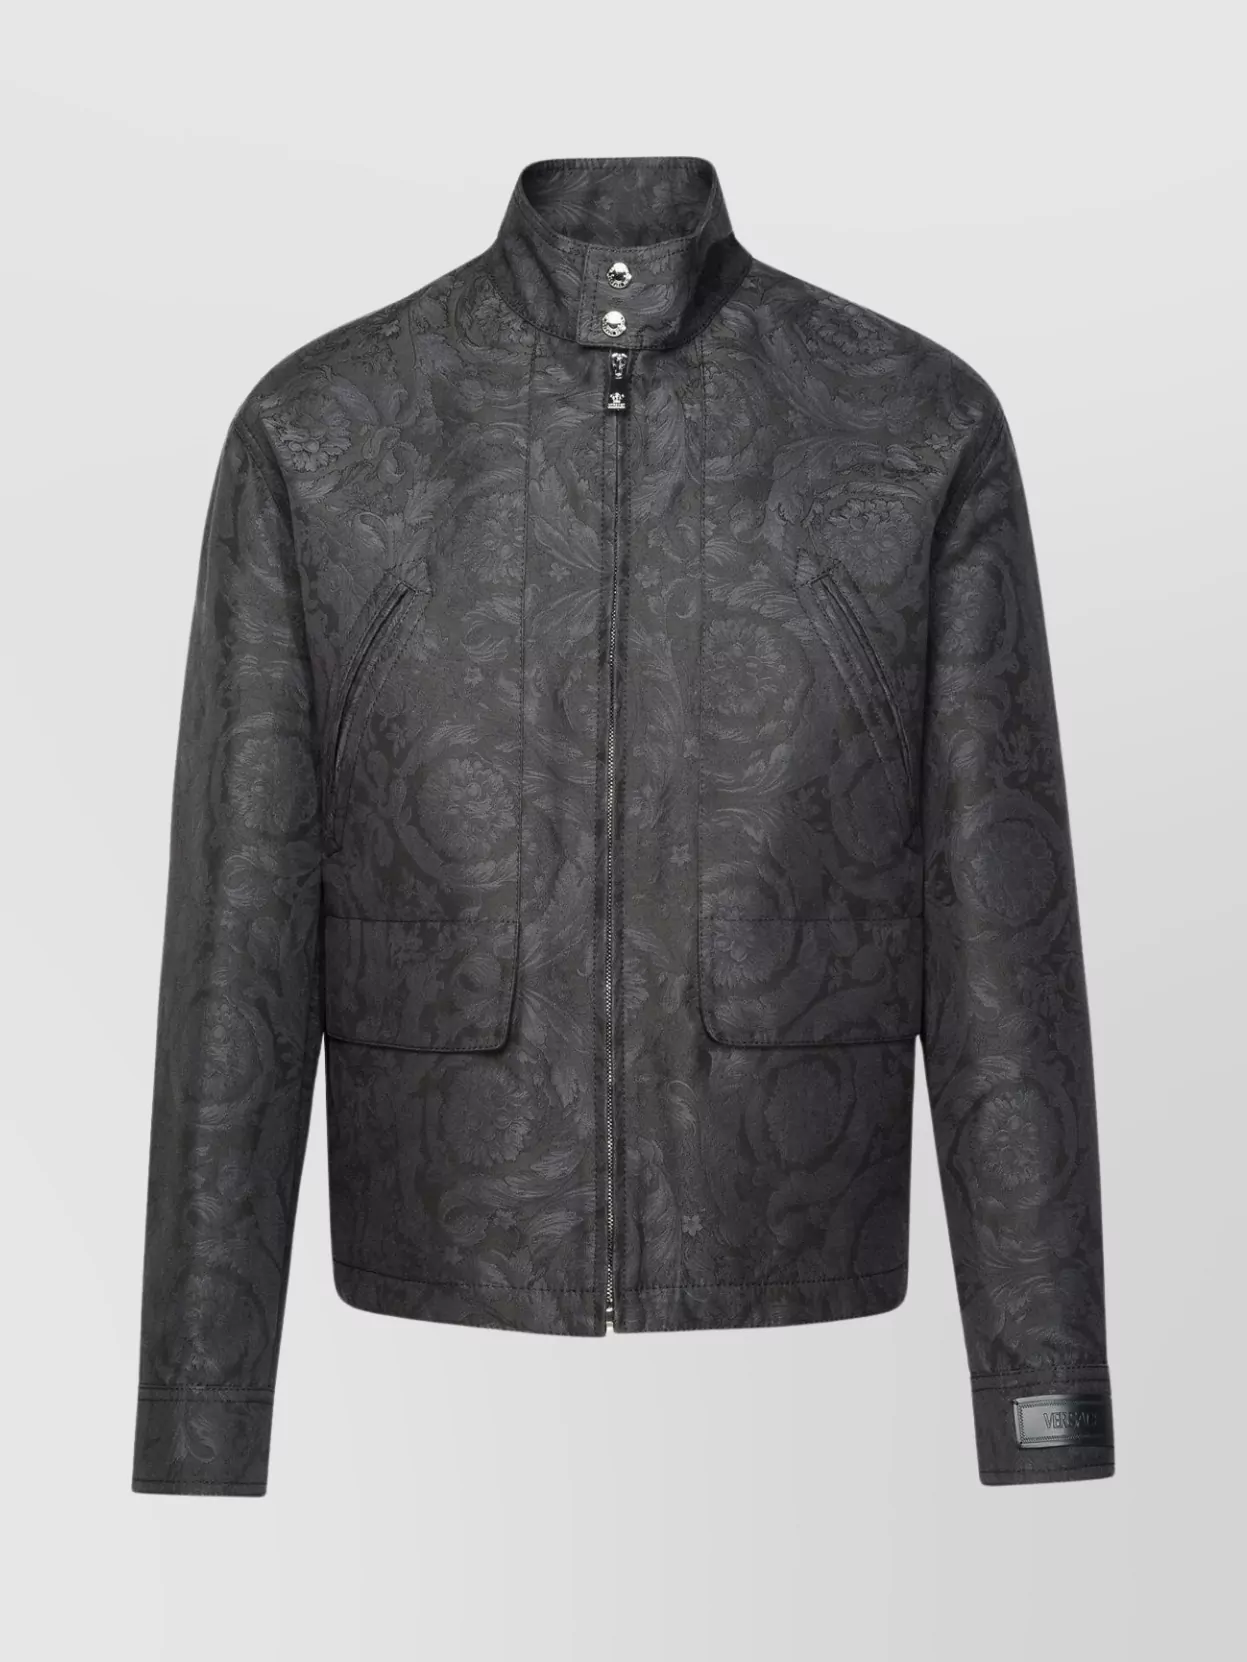 Versace 'barocco' Floral Cotton Jacket With Side Pockets